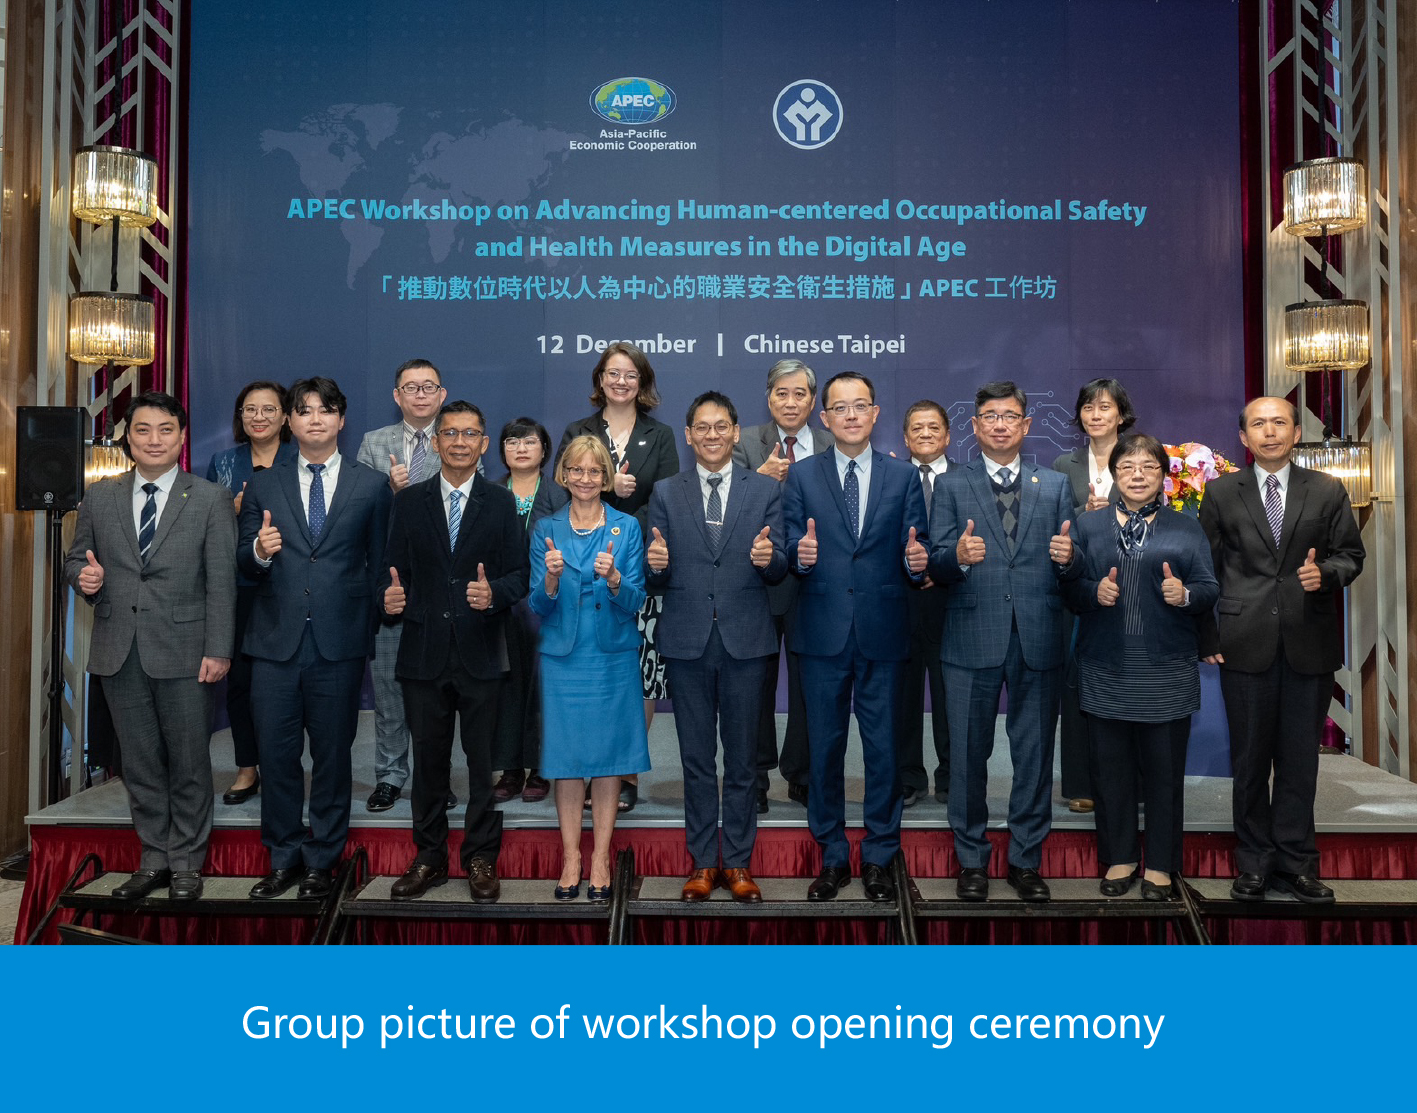 The Ministry of Labor Organized the APEC Workshop on "Advancing Human-centered Occupational Safety and Health Measures in the Digital Age"